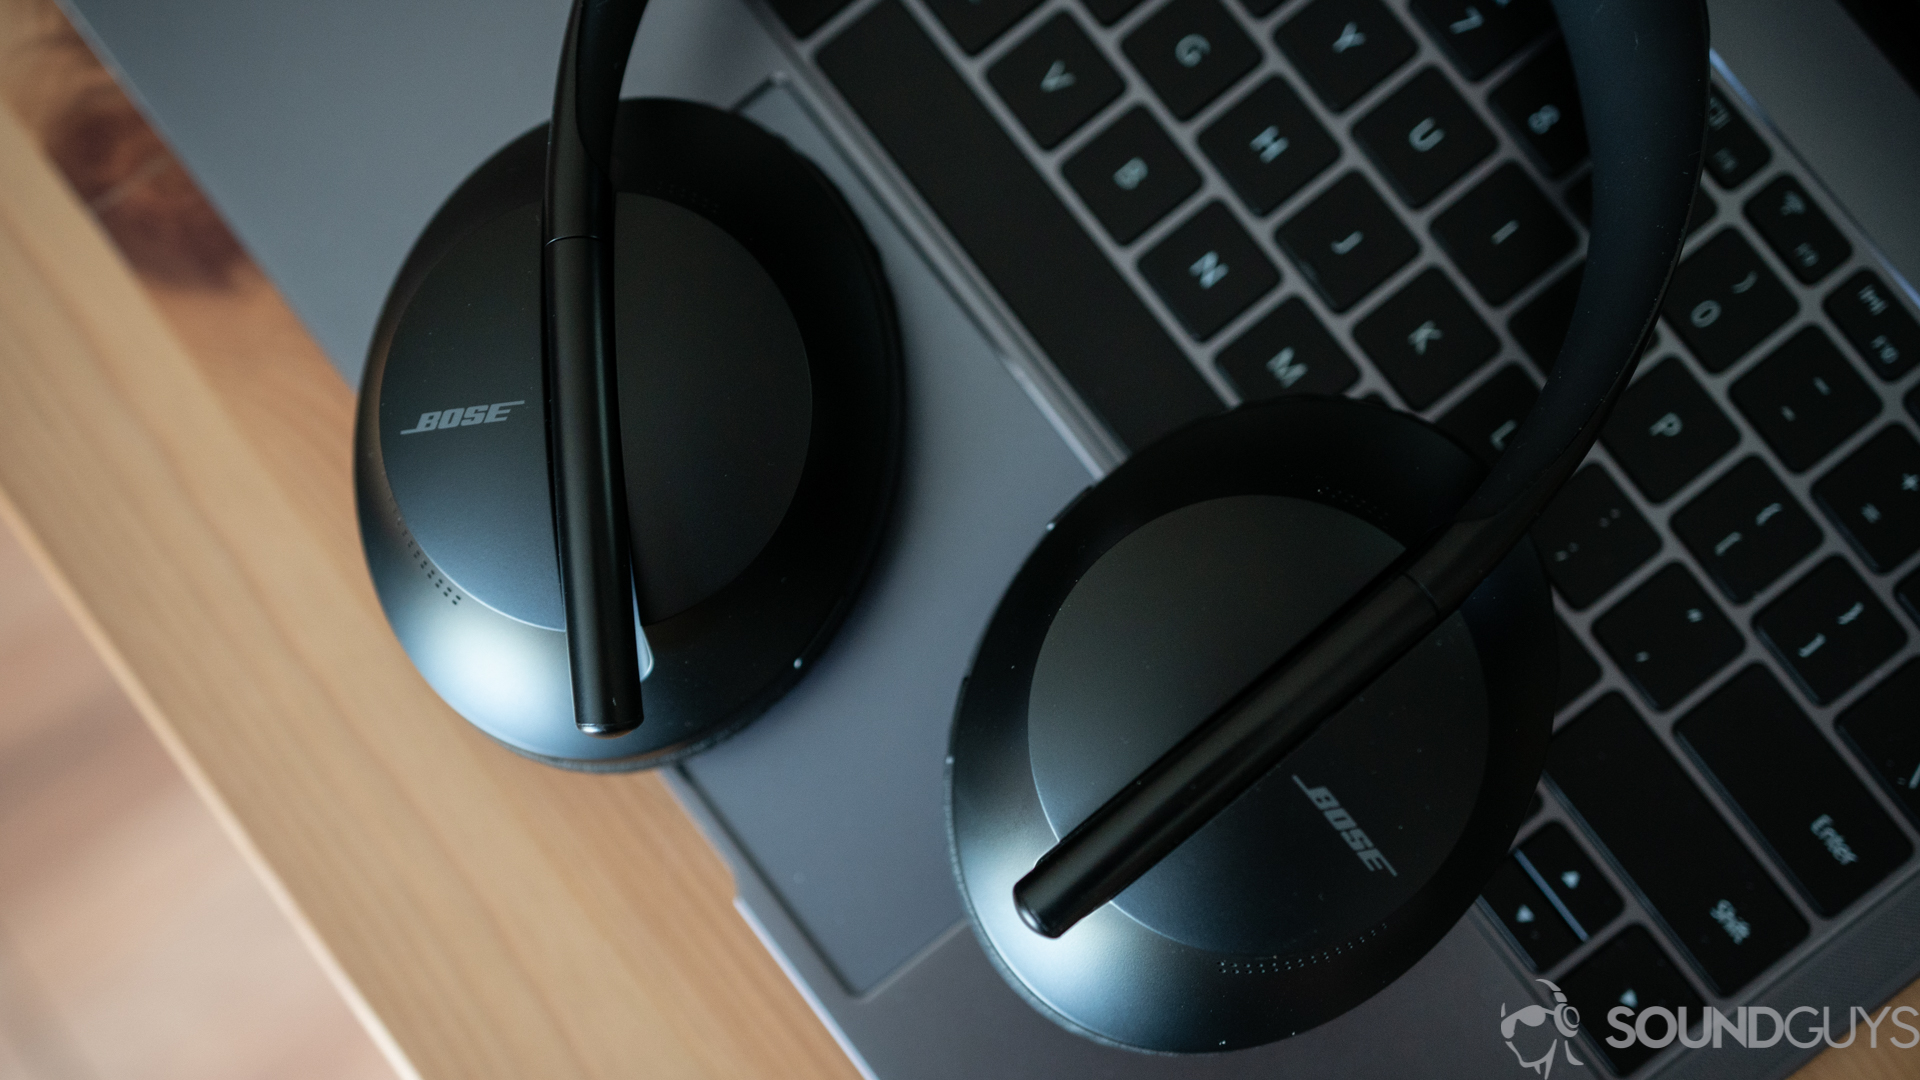 Pictured are the Bose Noise Cancelling Headphones 700 on top of the keyboard of a Huawei Matebook 